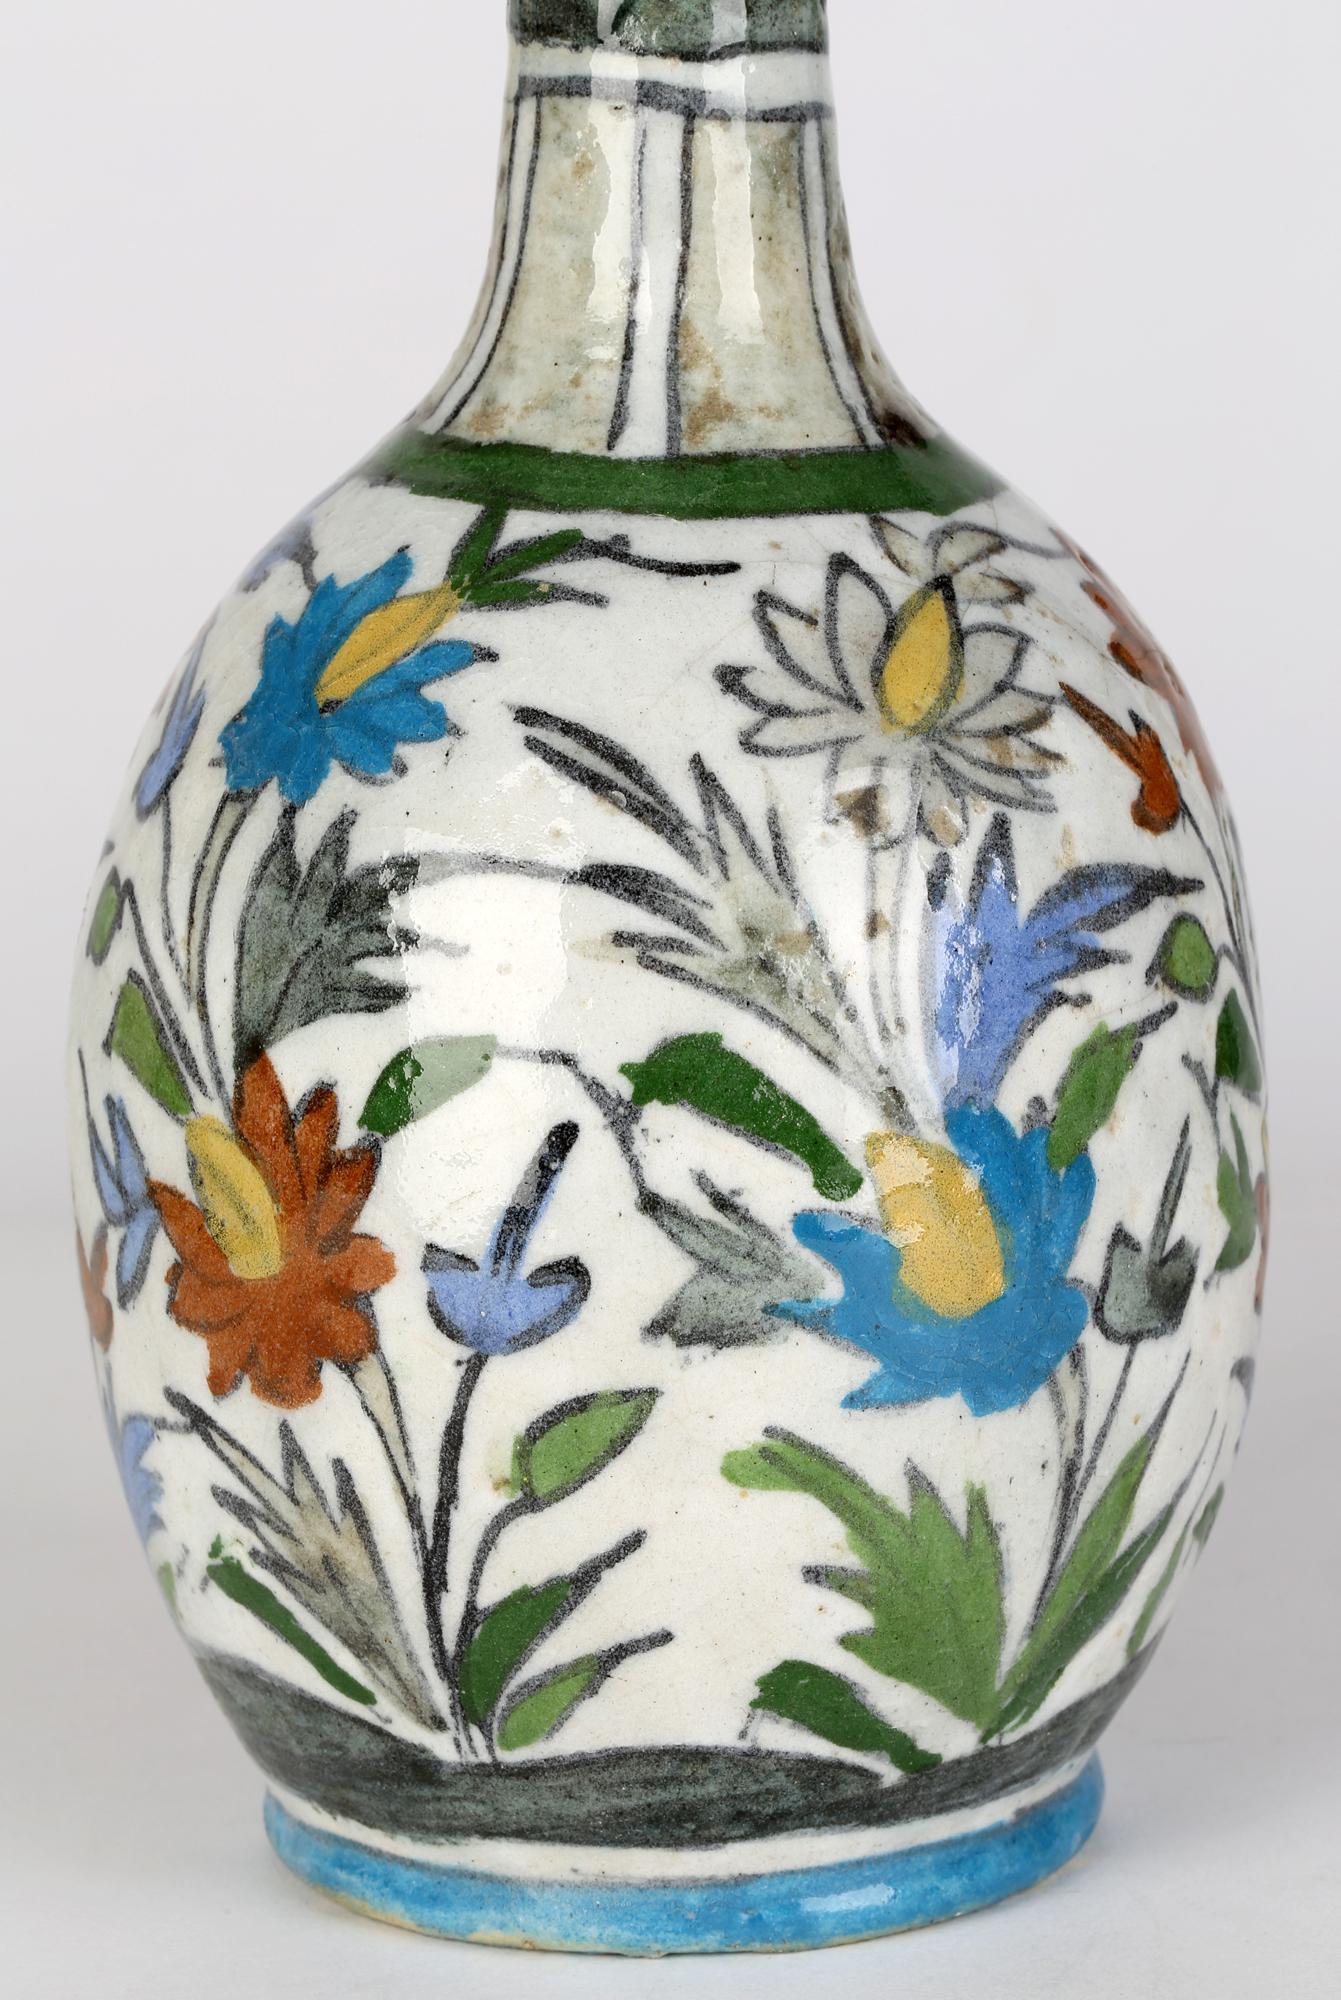 A good antique Persian art pottery bottle shaped vase hand painted with floral designs and dating from the 19th century. The vase stands raised on a round unglazed foot with a recessed base with a lower round bulbous body and tall slender neck with